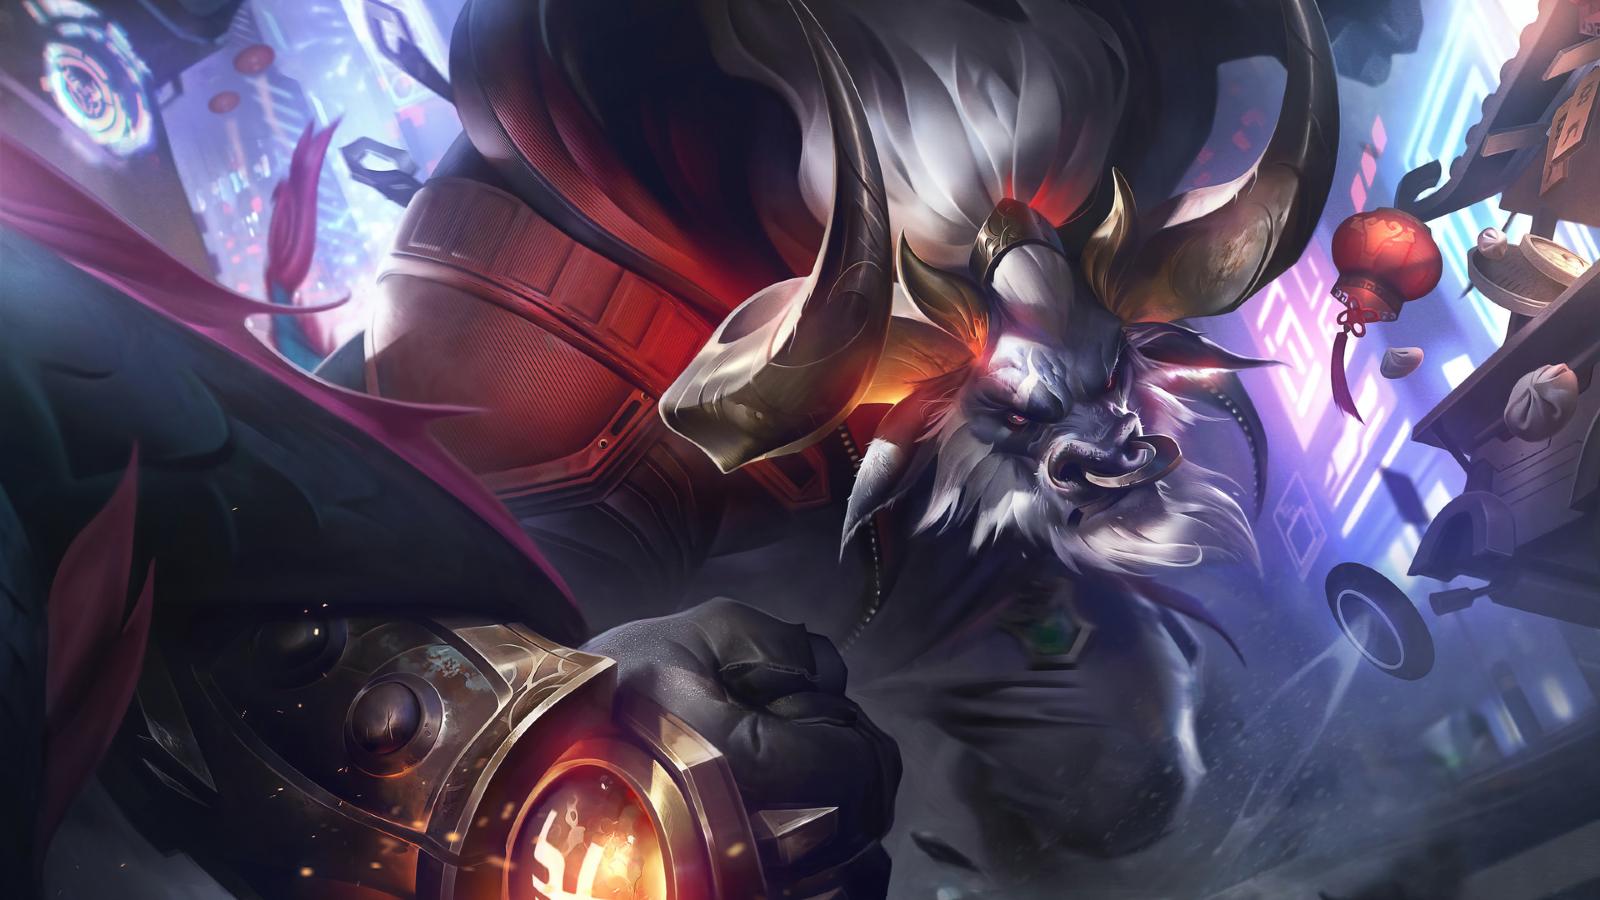 5 League of Legends champions that are always strong regardless of the meta